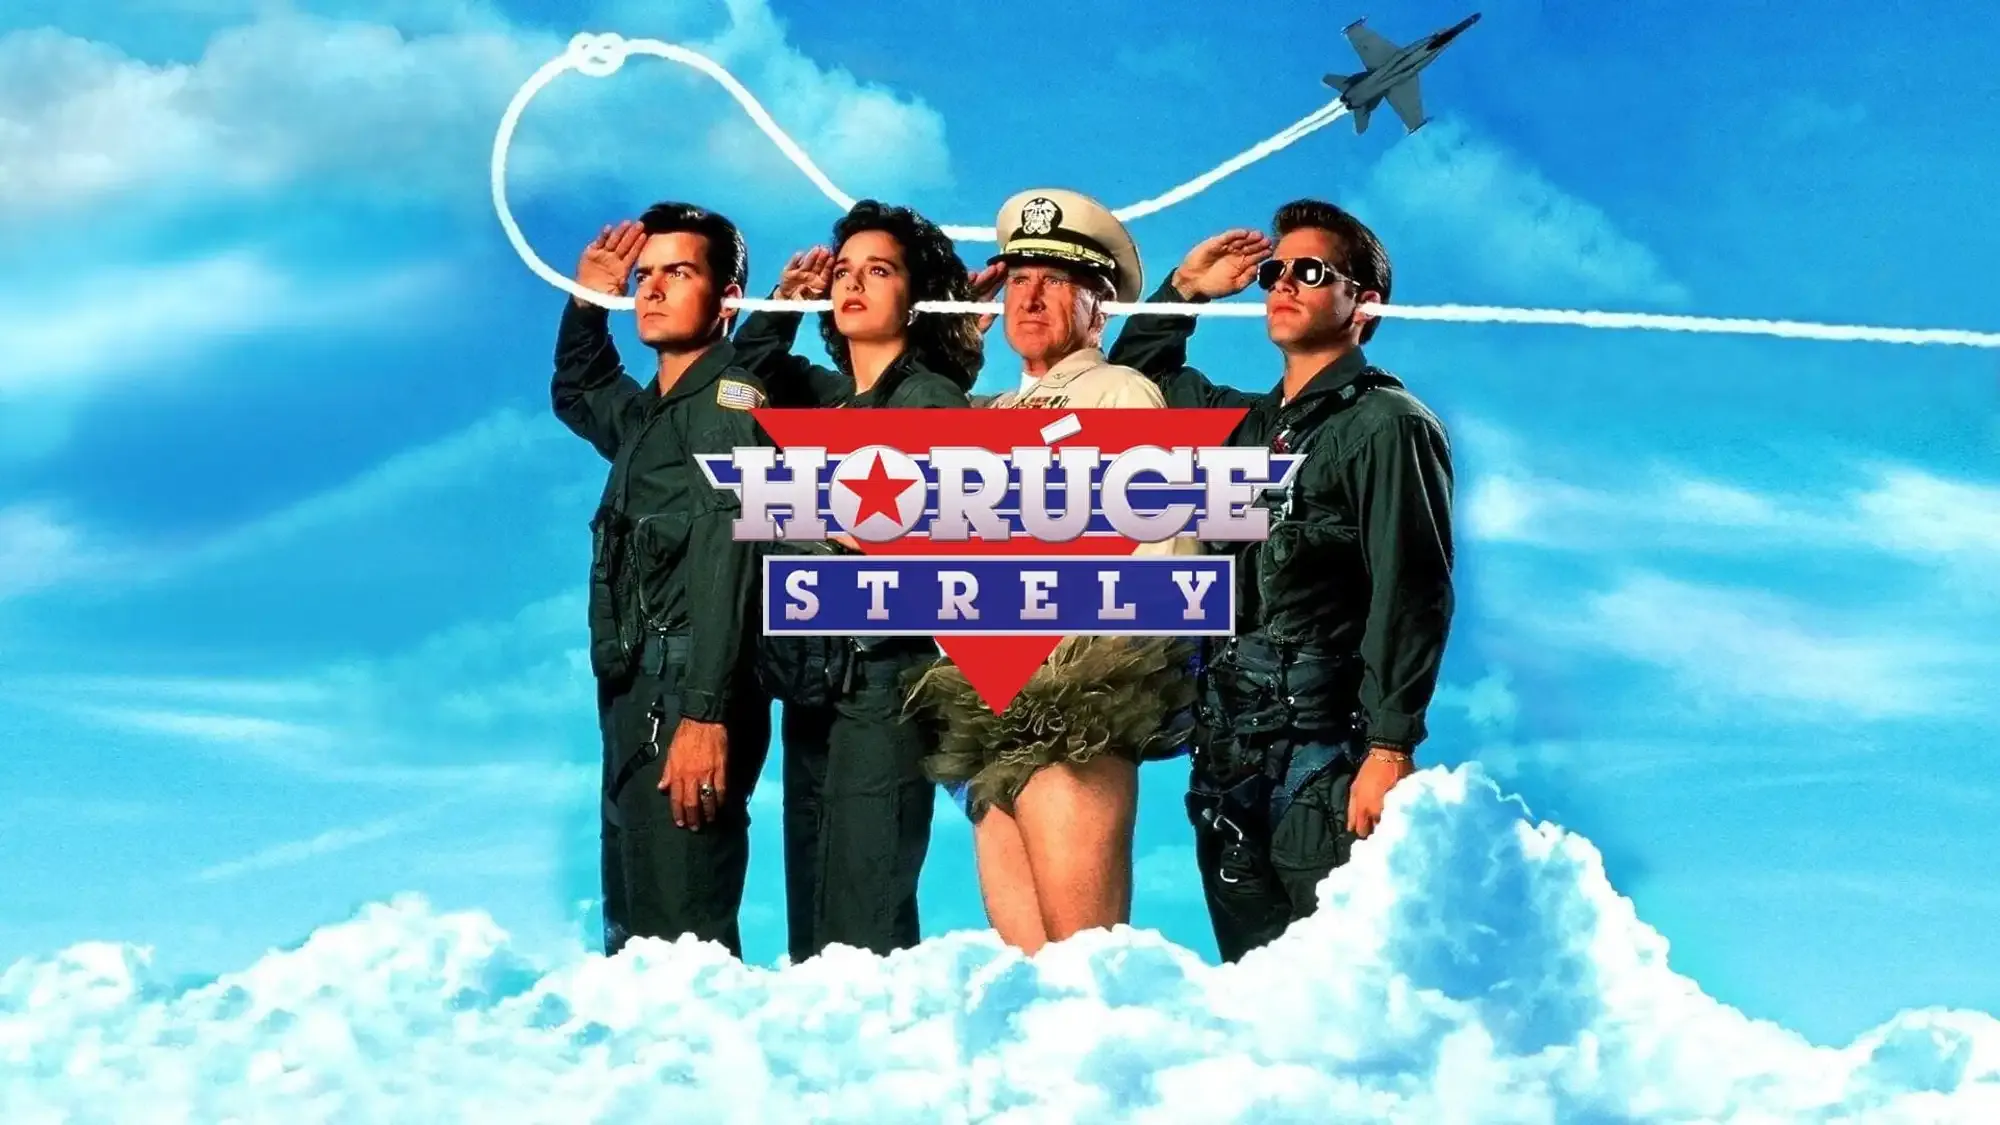 Hot Shots! movie review